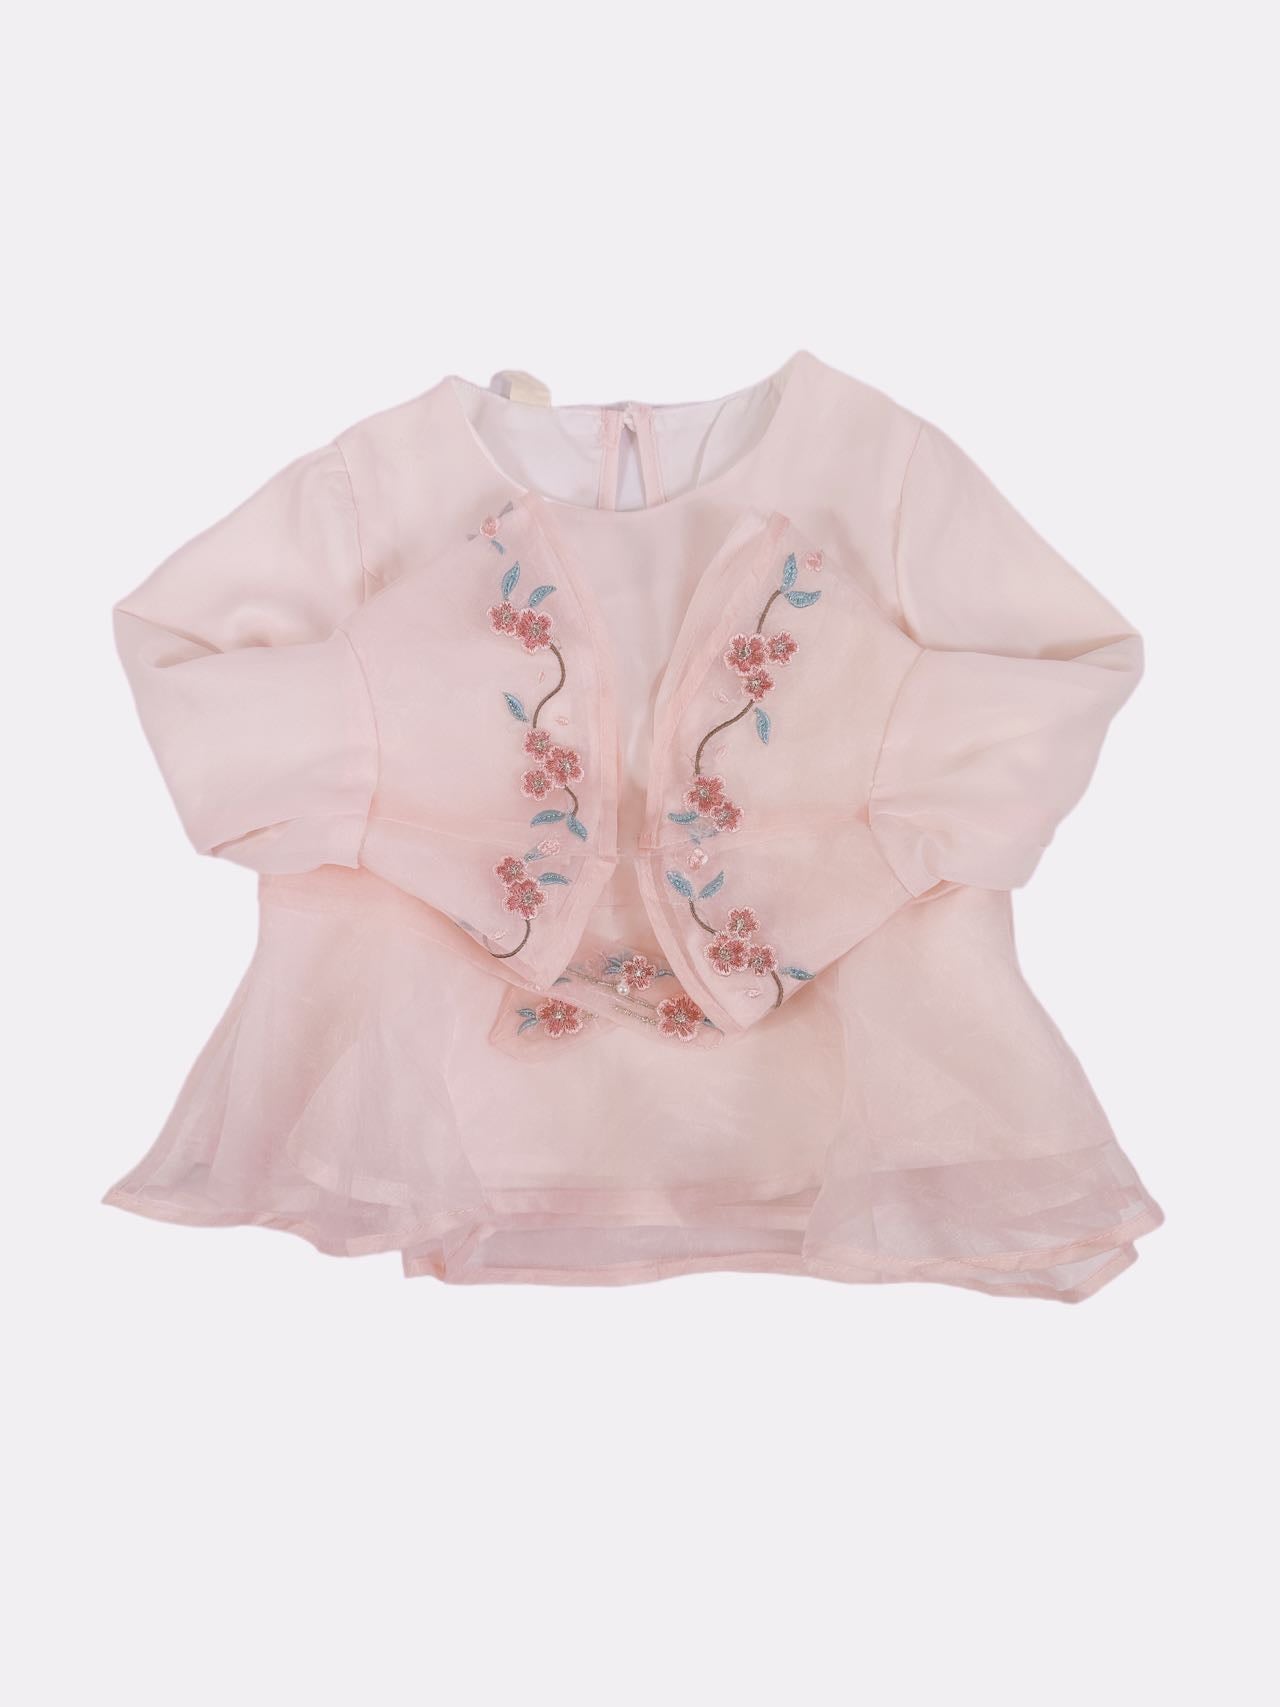 Tradition Girl Pink shirt(4Y)